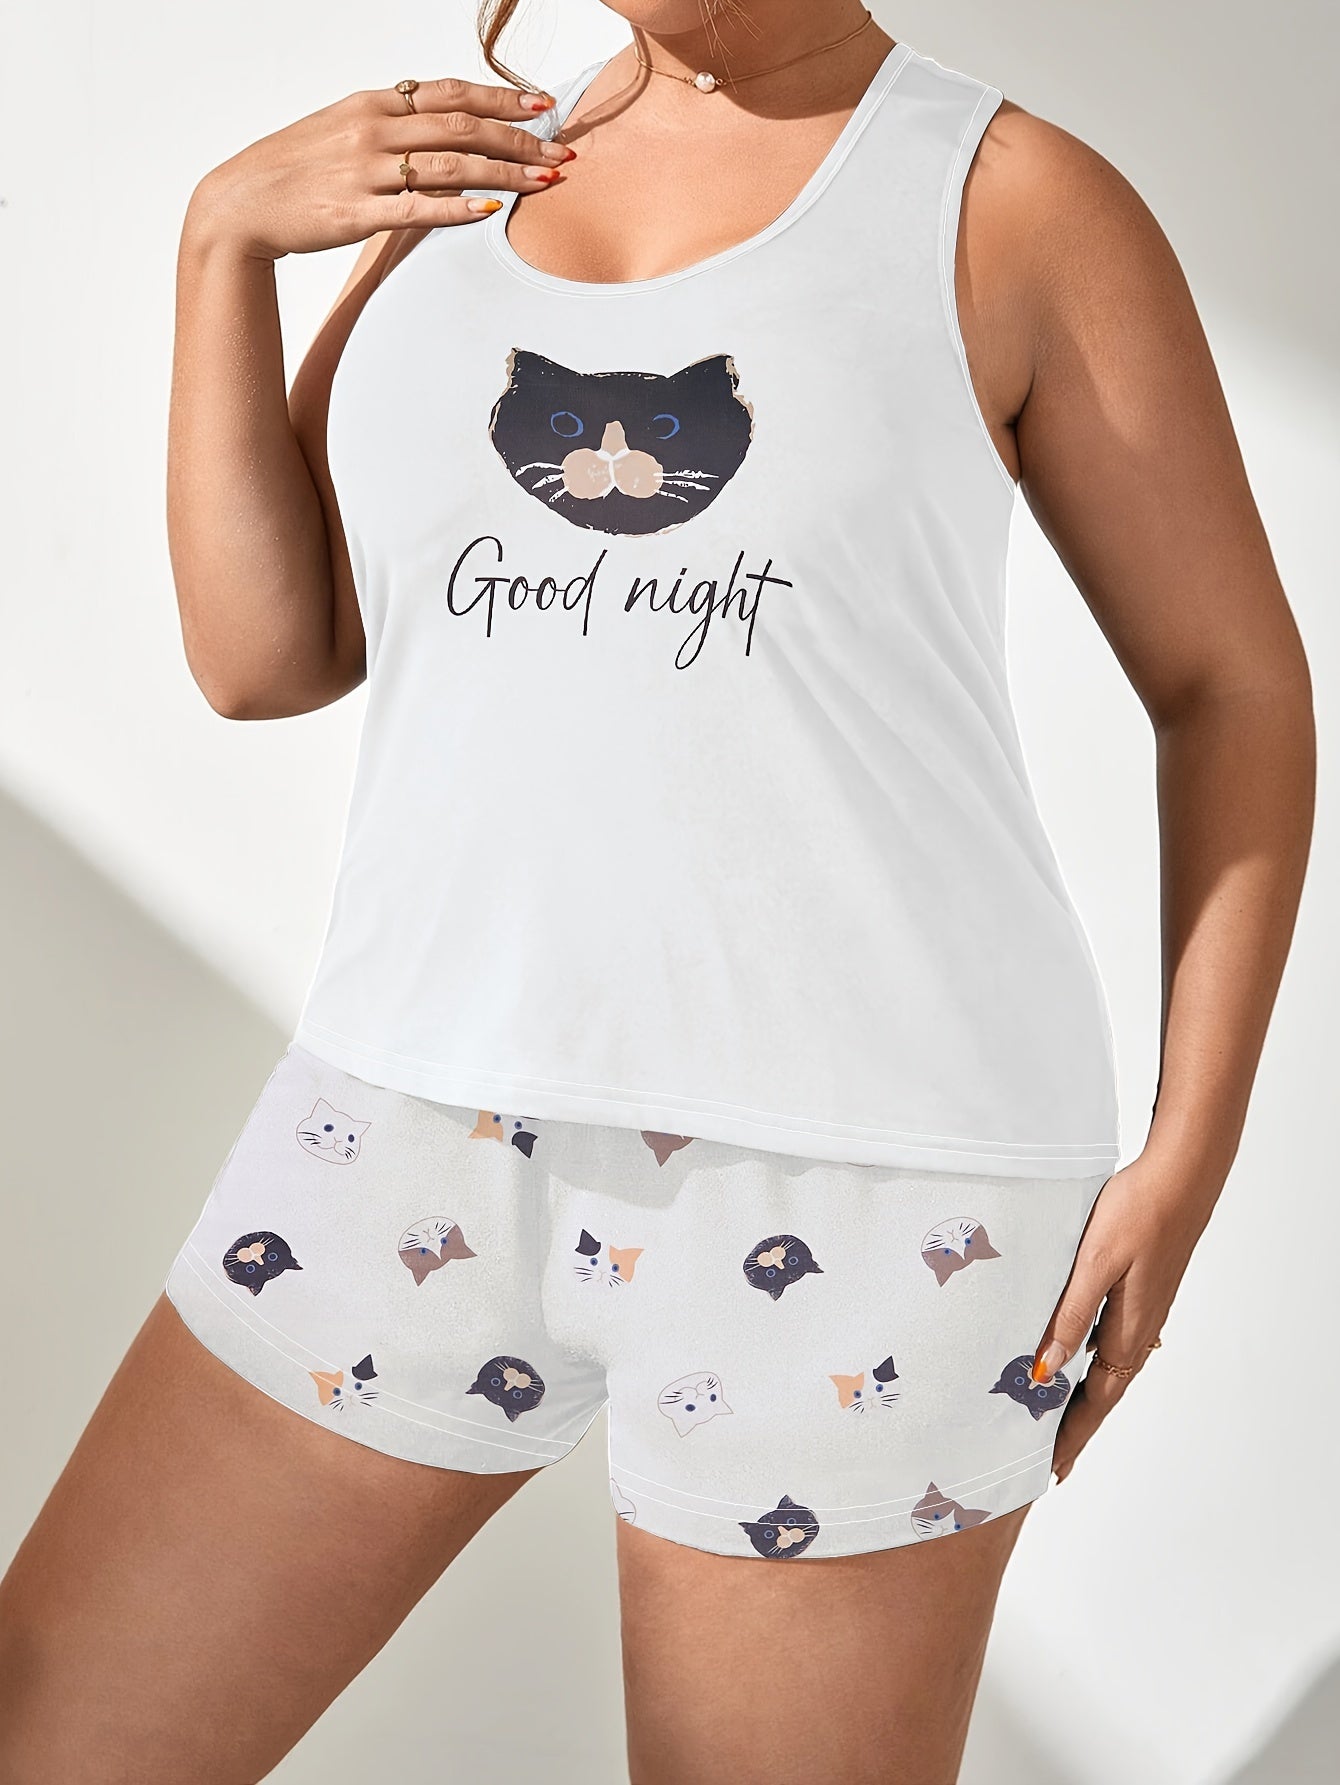 Plus Size Cute Goodnight Cat Pajamas Set - Flattering Plus Size Fit with Adorable Whimsical Cartoon Cat Pattern, Soft and Cozy Scoop Neck Design, Comfy Shorts for Ultimate Relaxation - Complete 2-Piece Pajama set